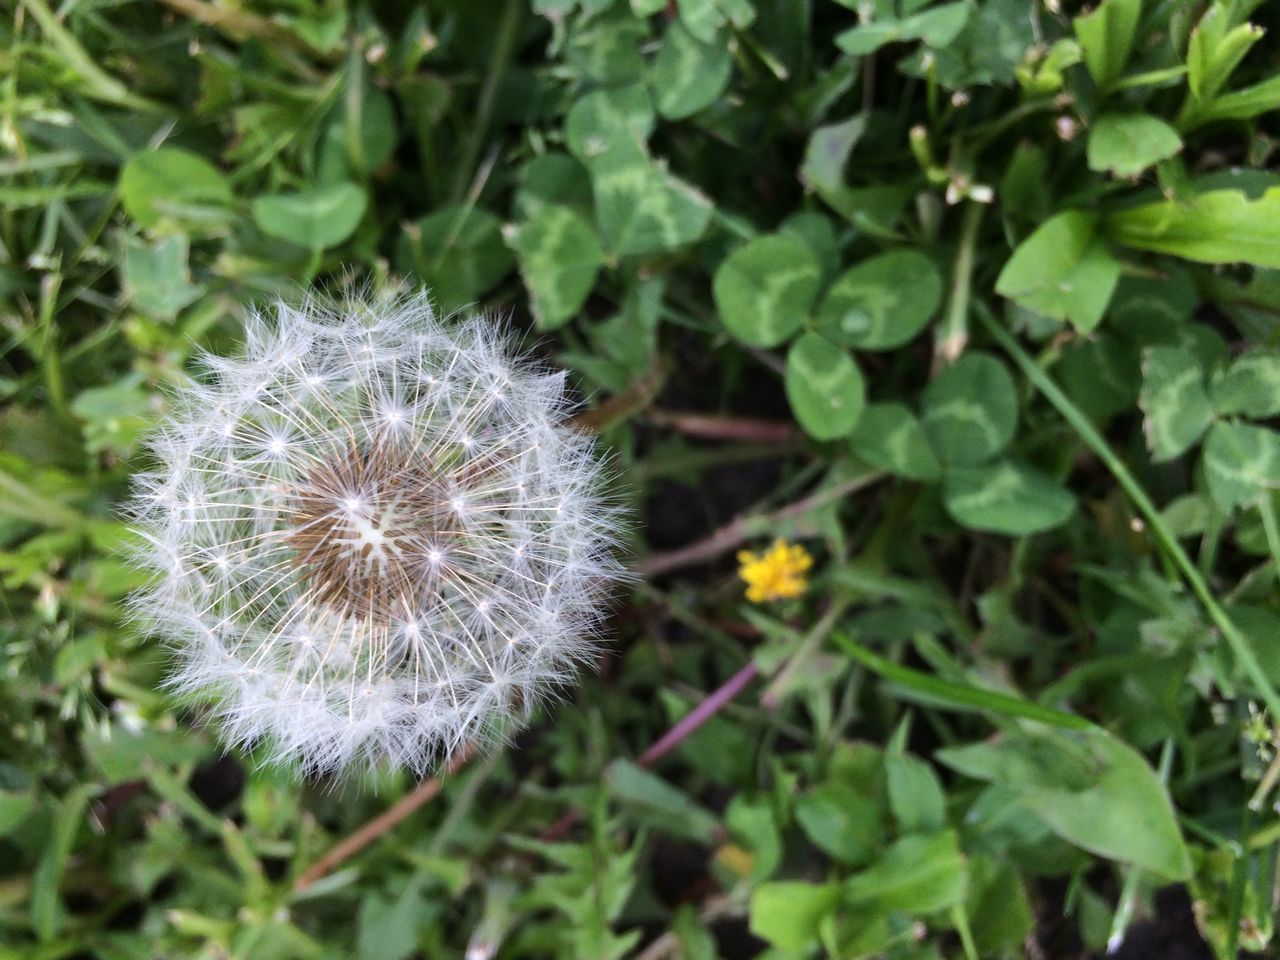 CLOSE-UP OF DANDELION GROWING ON FIELD